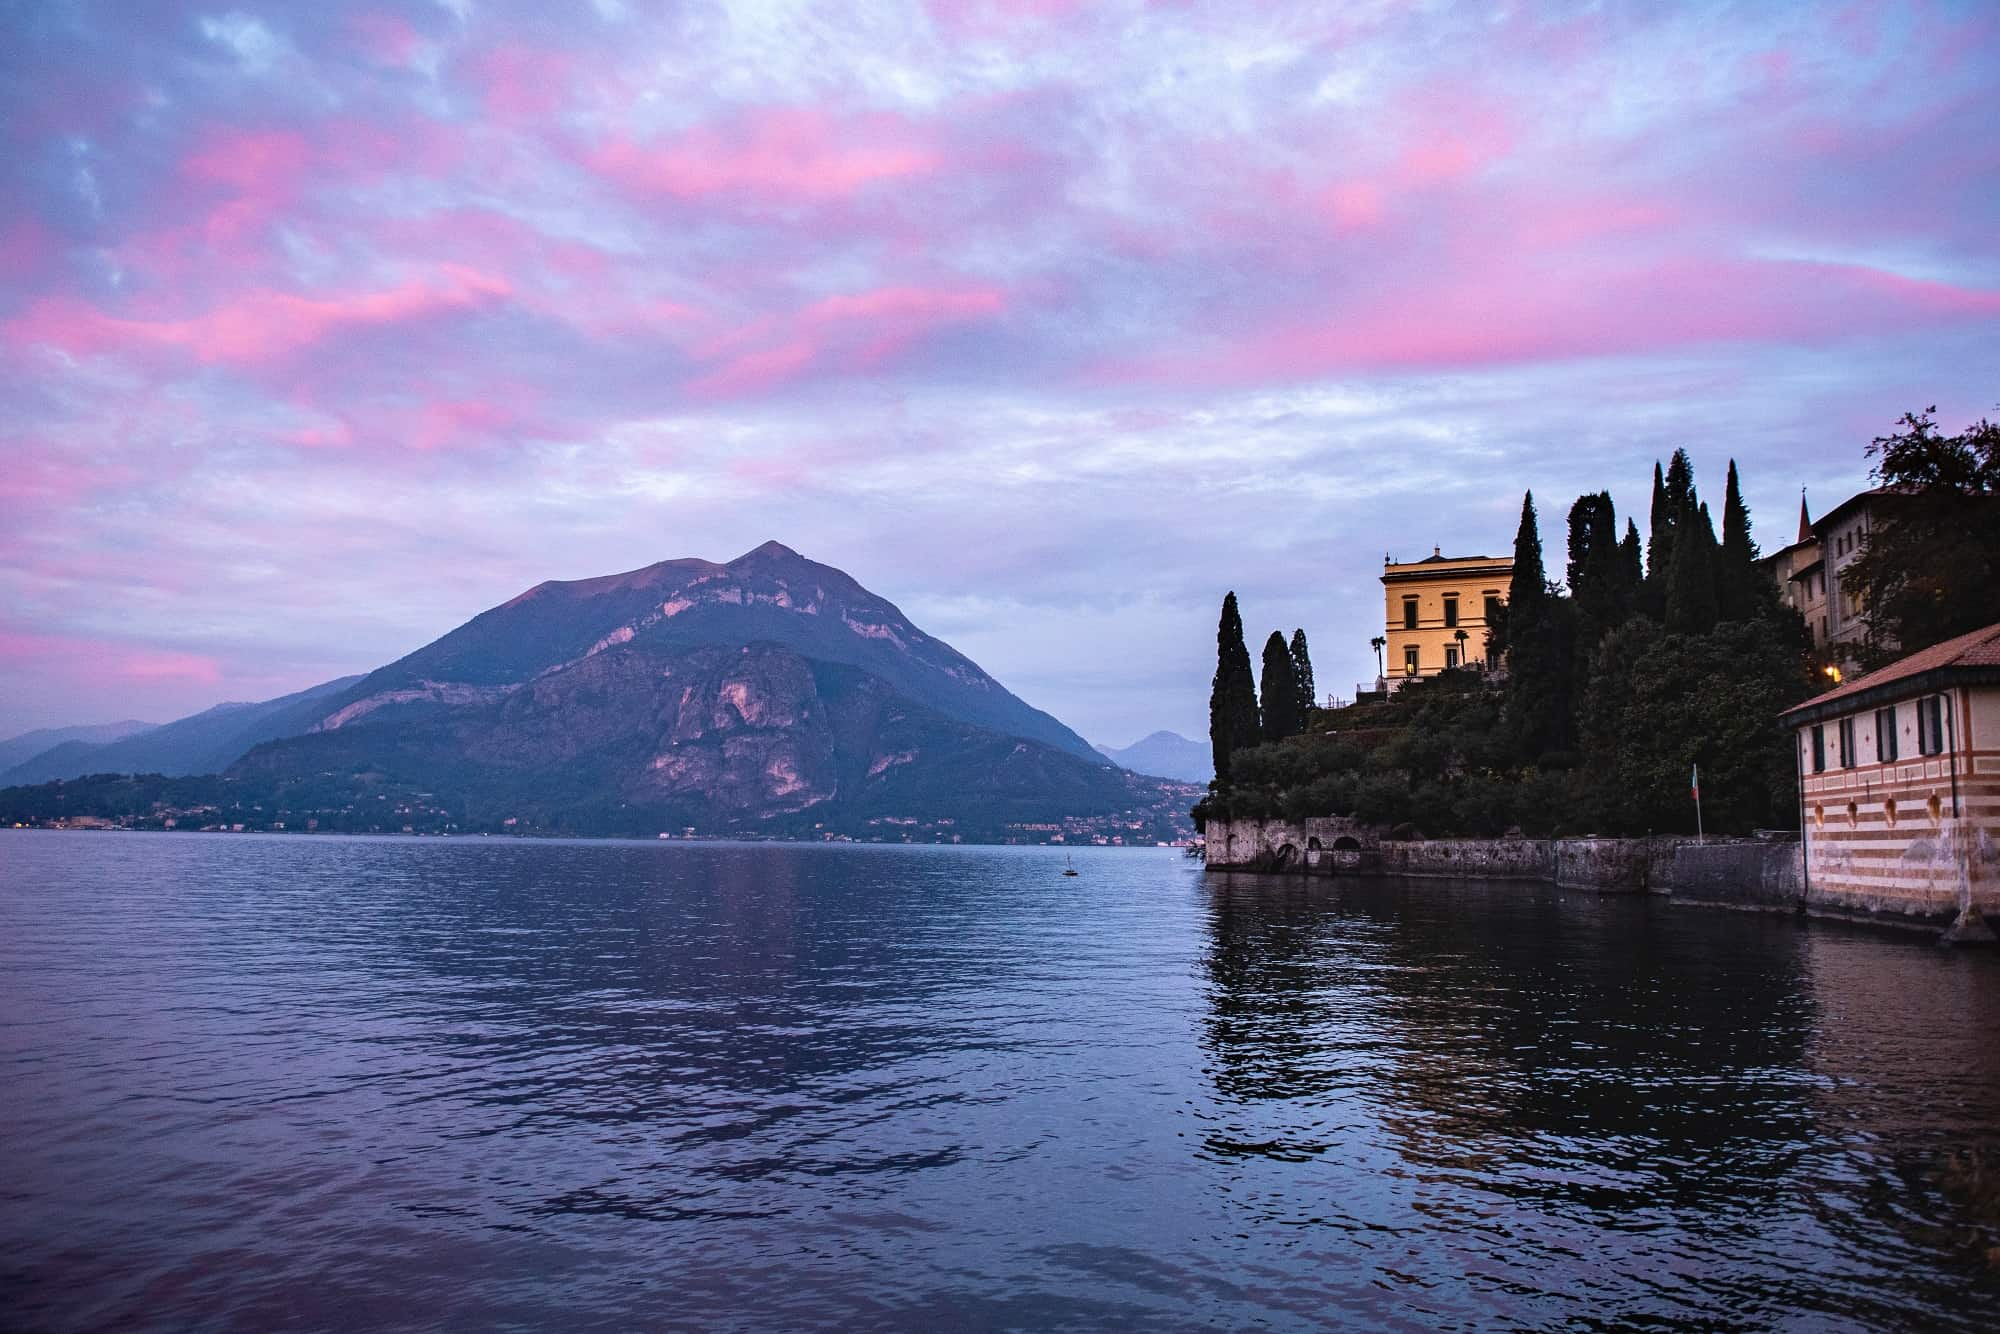 sunrise on lake como in italy, pink blue skies with villa cipressi pm the right